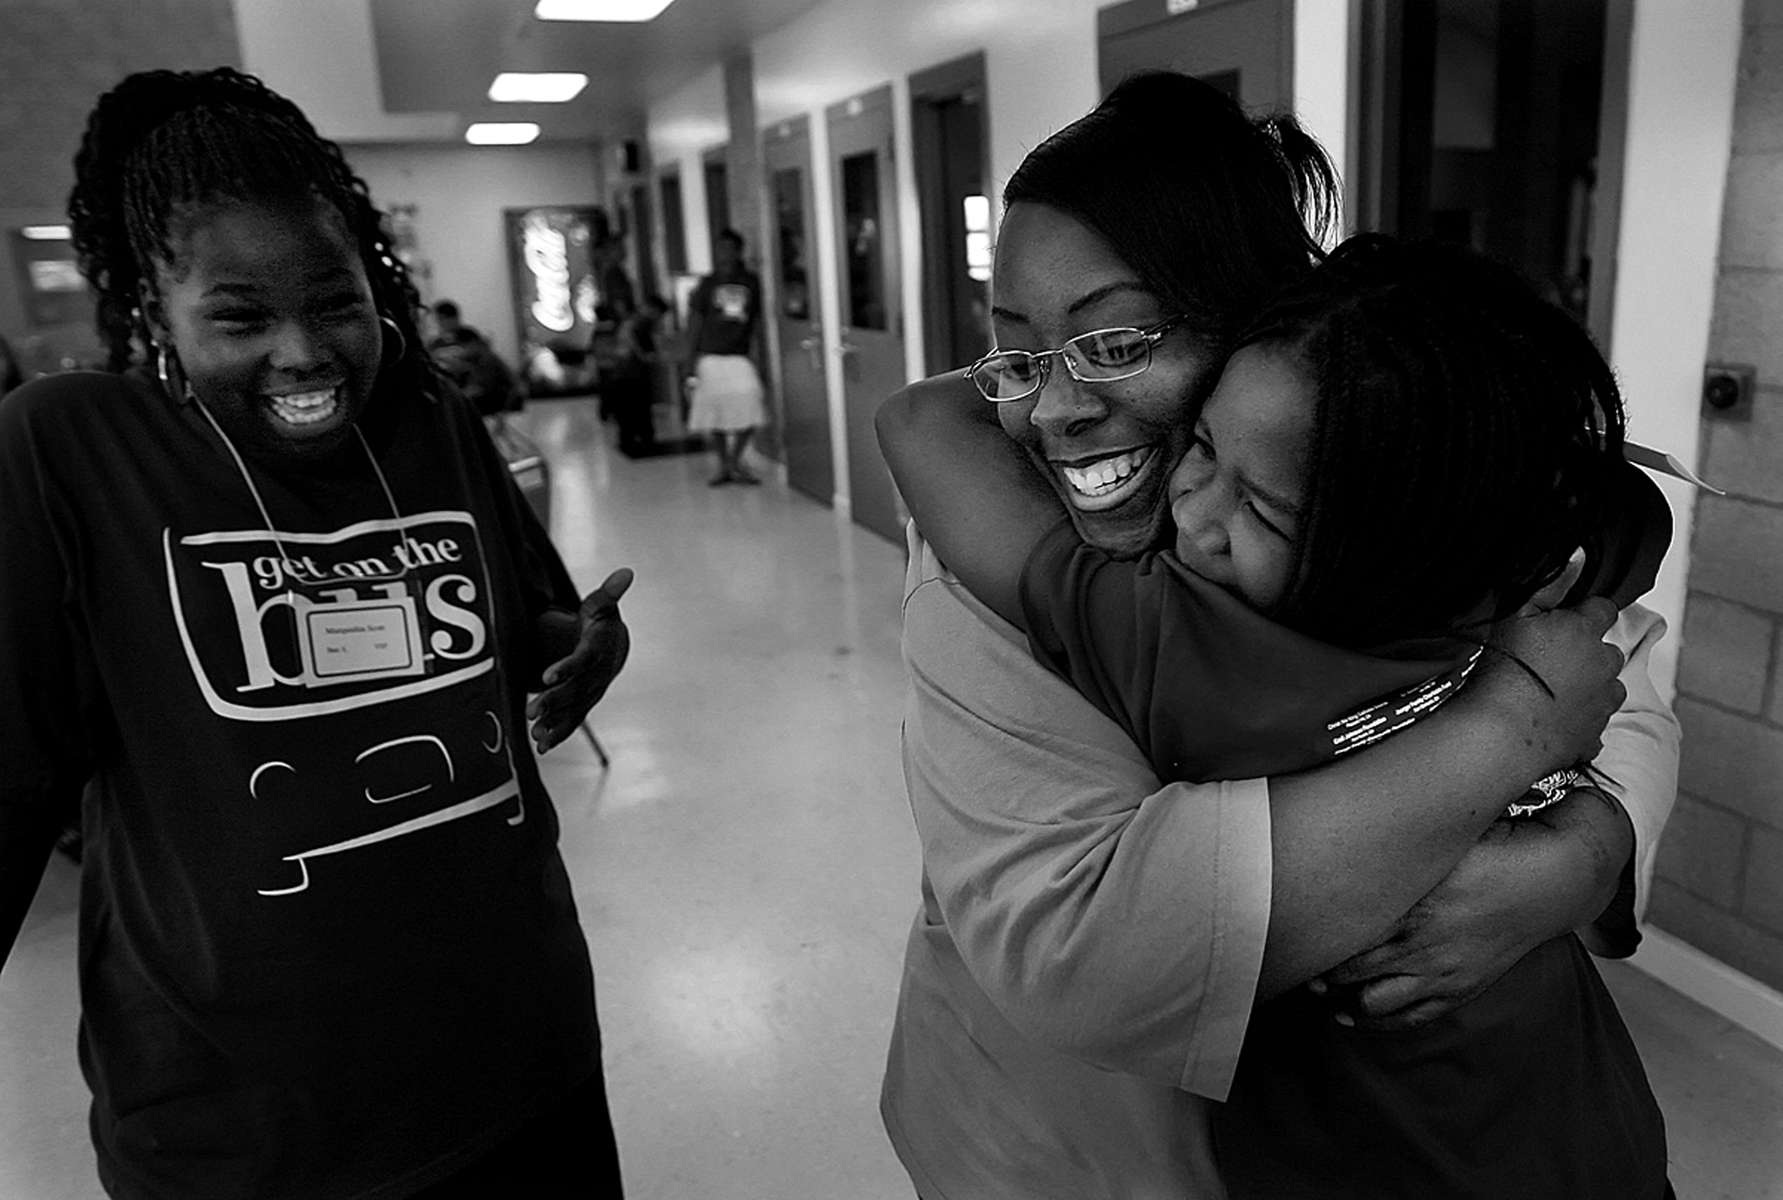 Sonja Bullette embraces one of her daughters, Jada Pointer, 9, as her other daughter, Marquisha Scout,laughs with joy. (The Press-Enterprise/ Mark Zaleski)